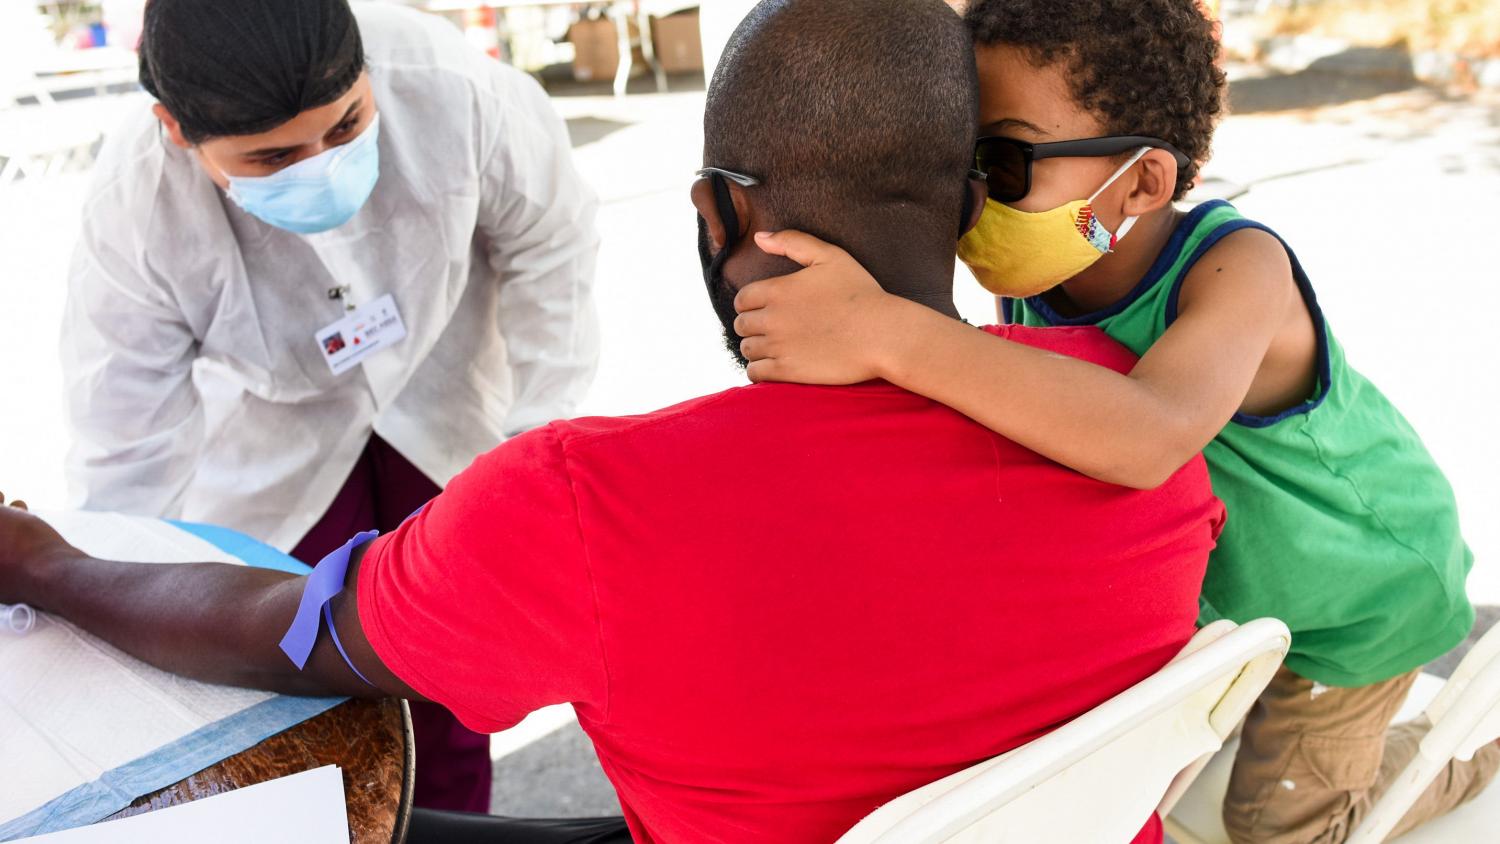 A volunteer healthcare worker at the Fruitvale COVID Testing Event draws blood from an African American man. His young son hugs him and provide reassurance